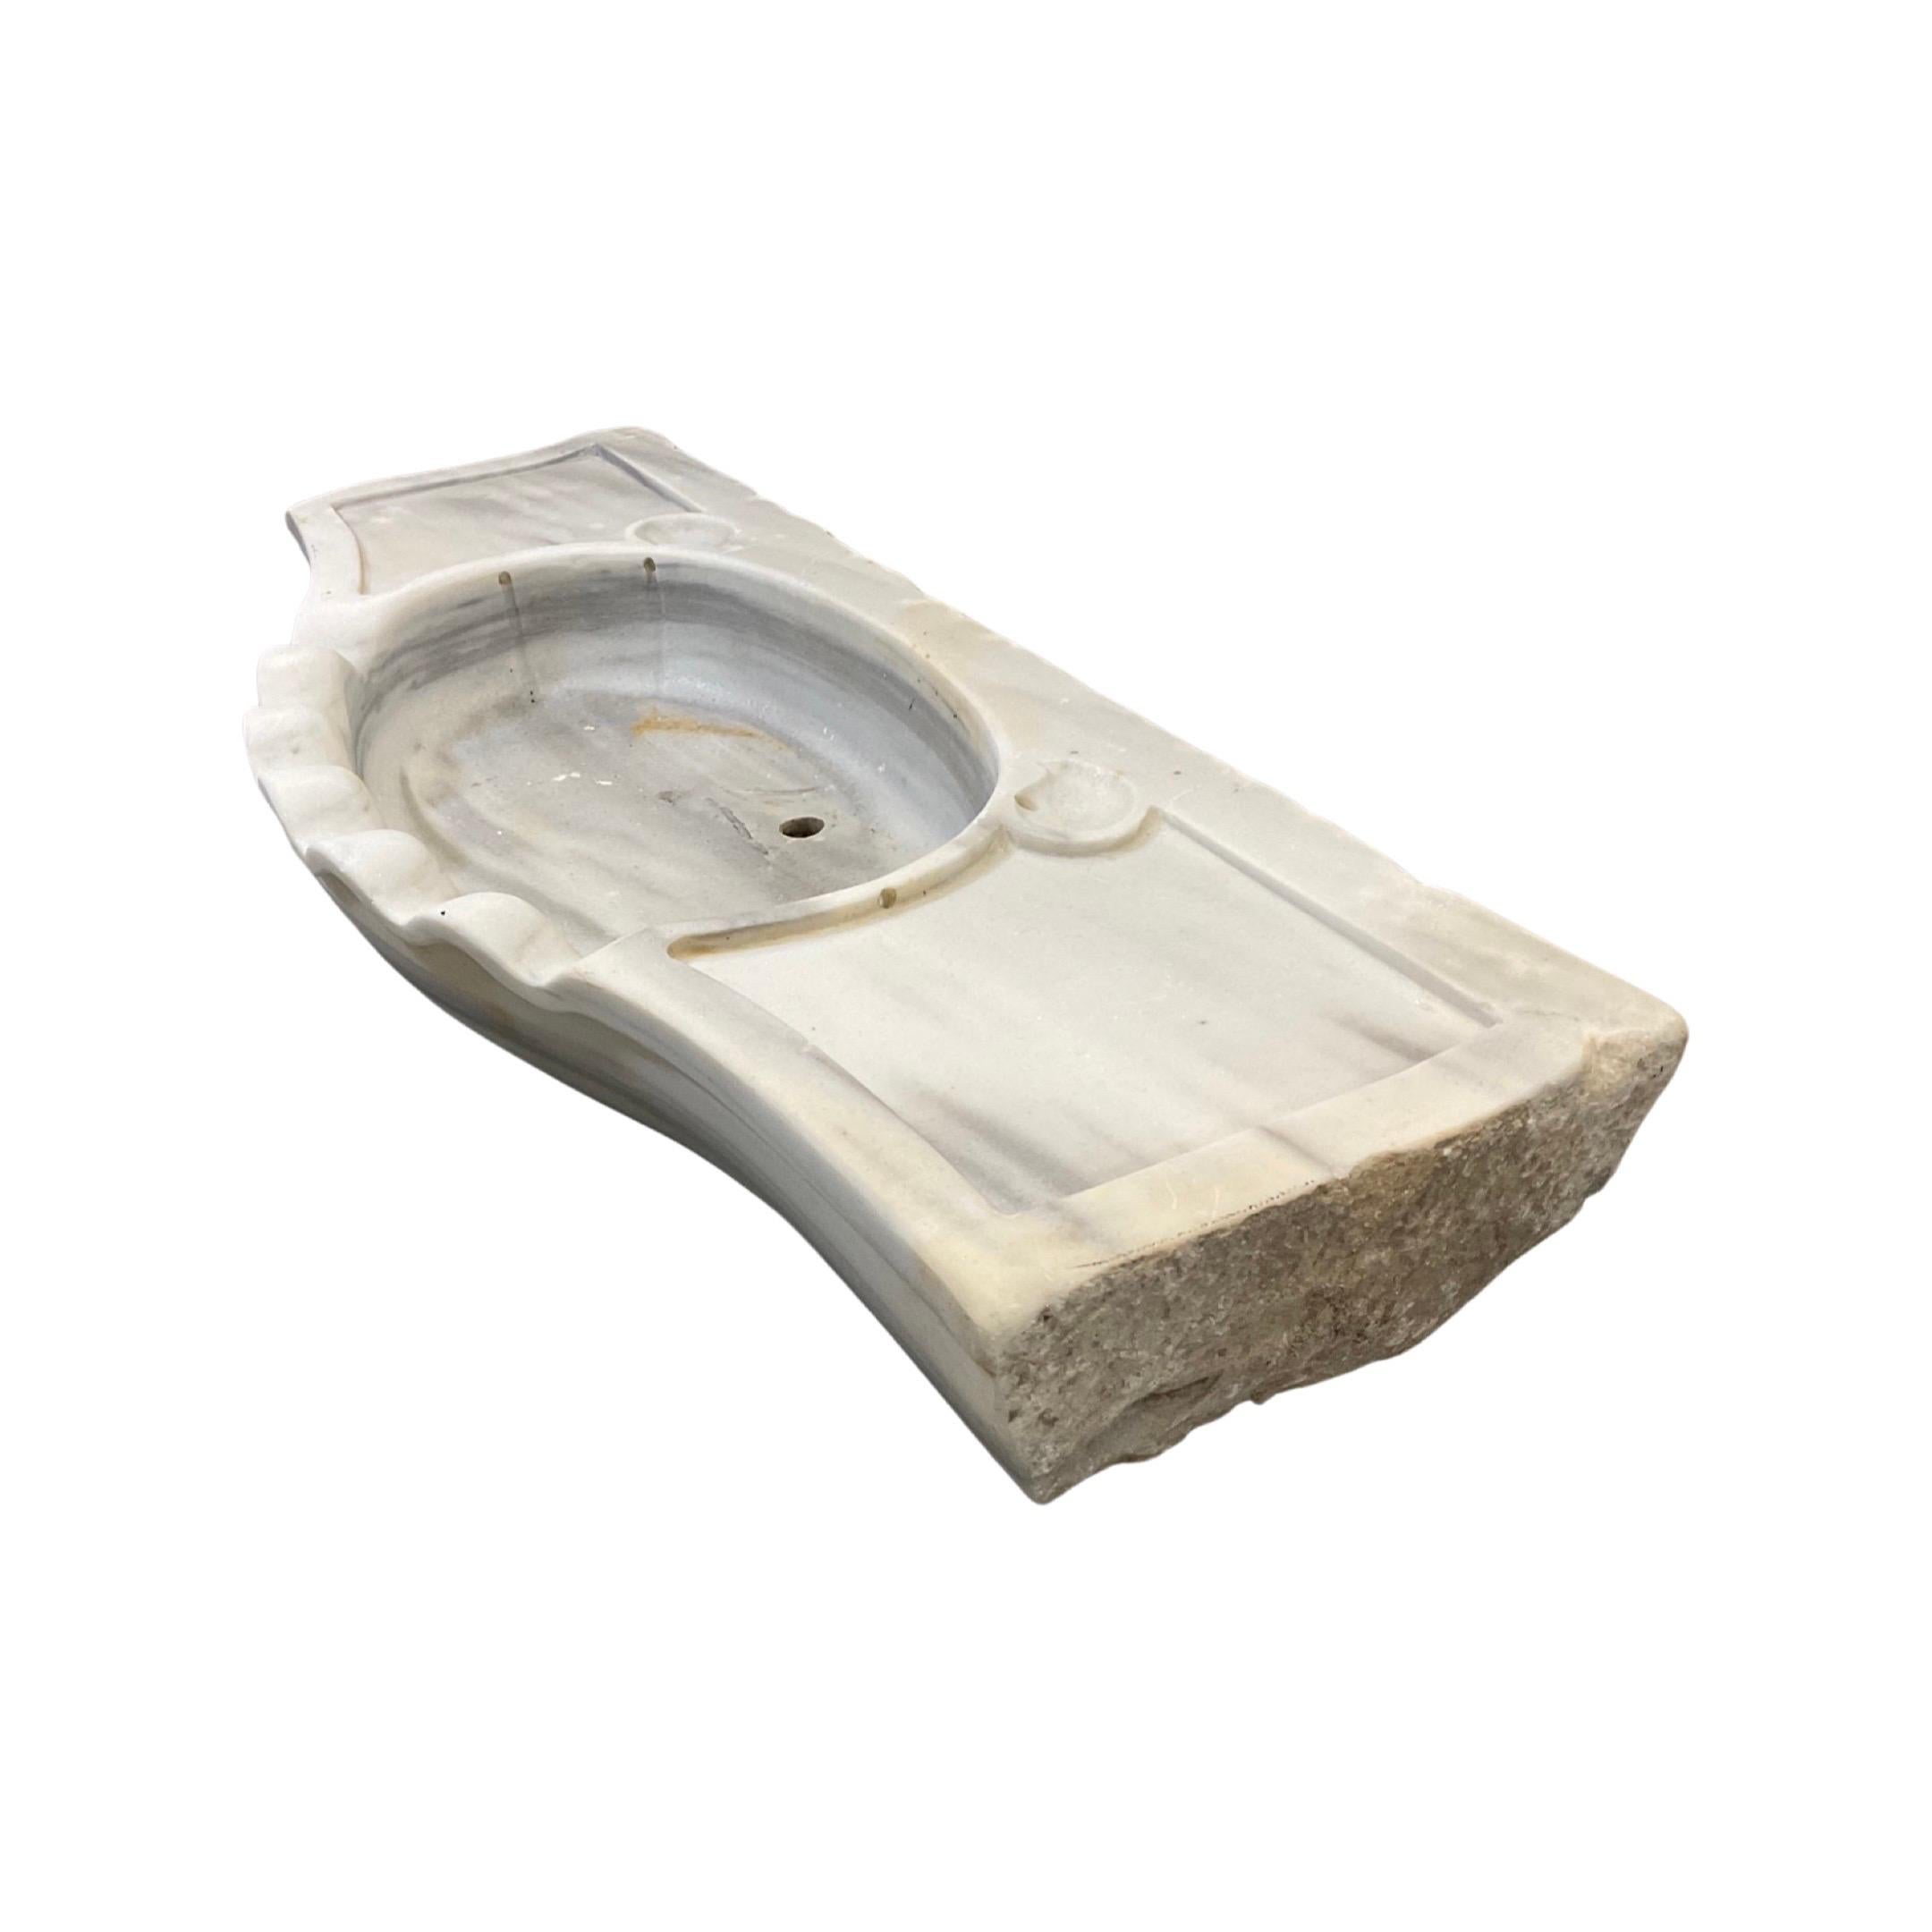 This French White Marble Sink is a timeless design from the 18th century. Featuring a pristine white marble exterior and sleek design, it's an exquisite addition to any bathroom or kitchen. It's an ideal choice for those looking for an elegant and